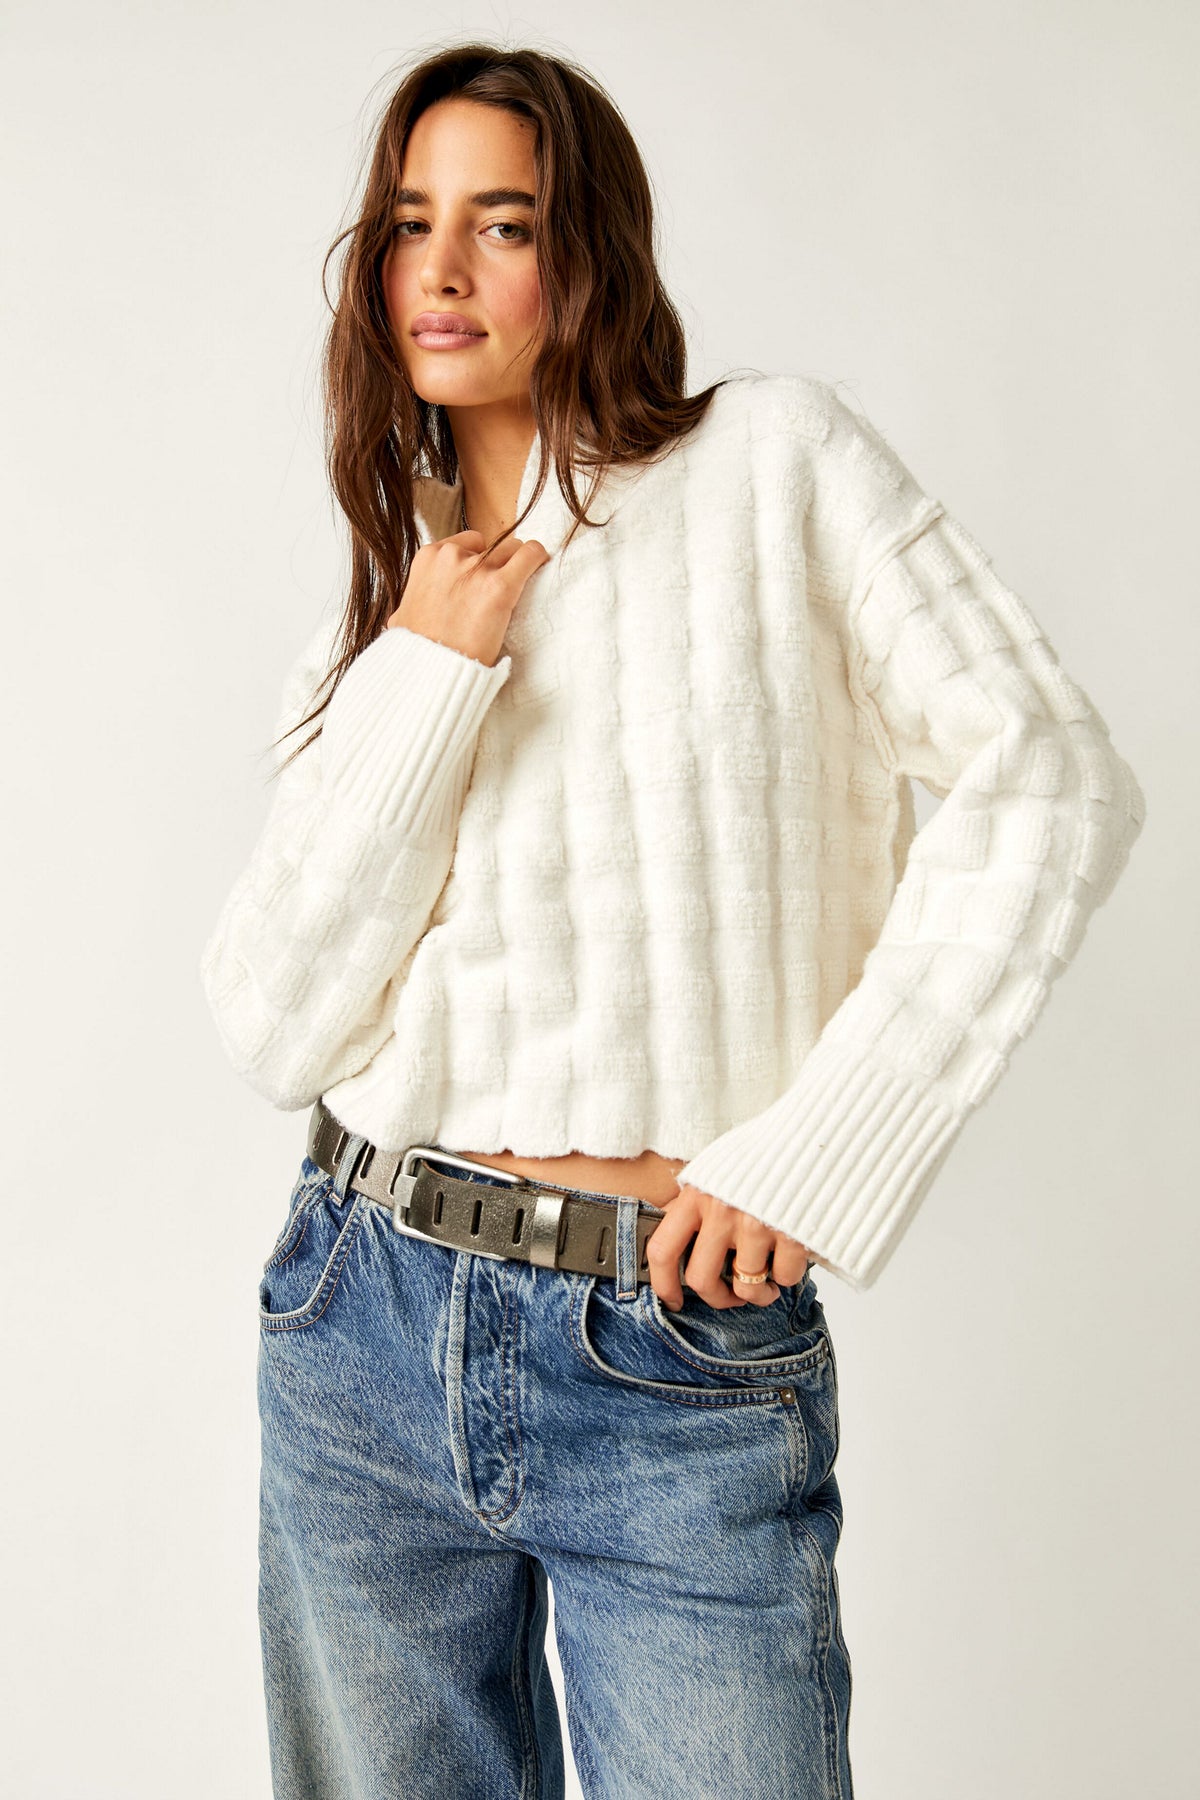 Care Free People Soul Searcher Mock Neck Sweater - Ivory